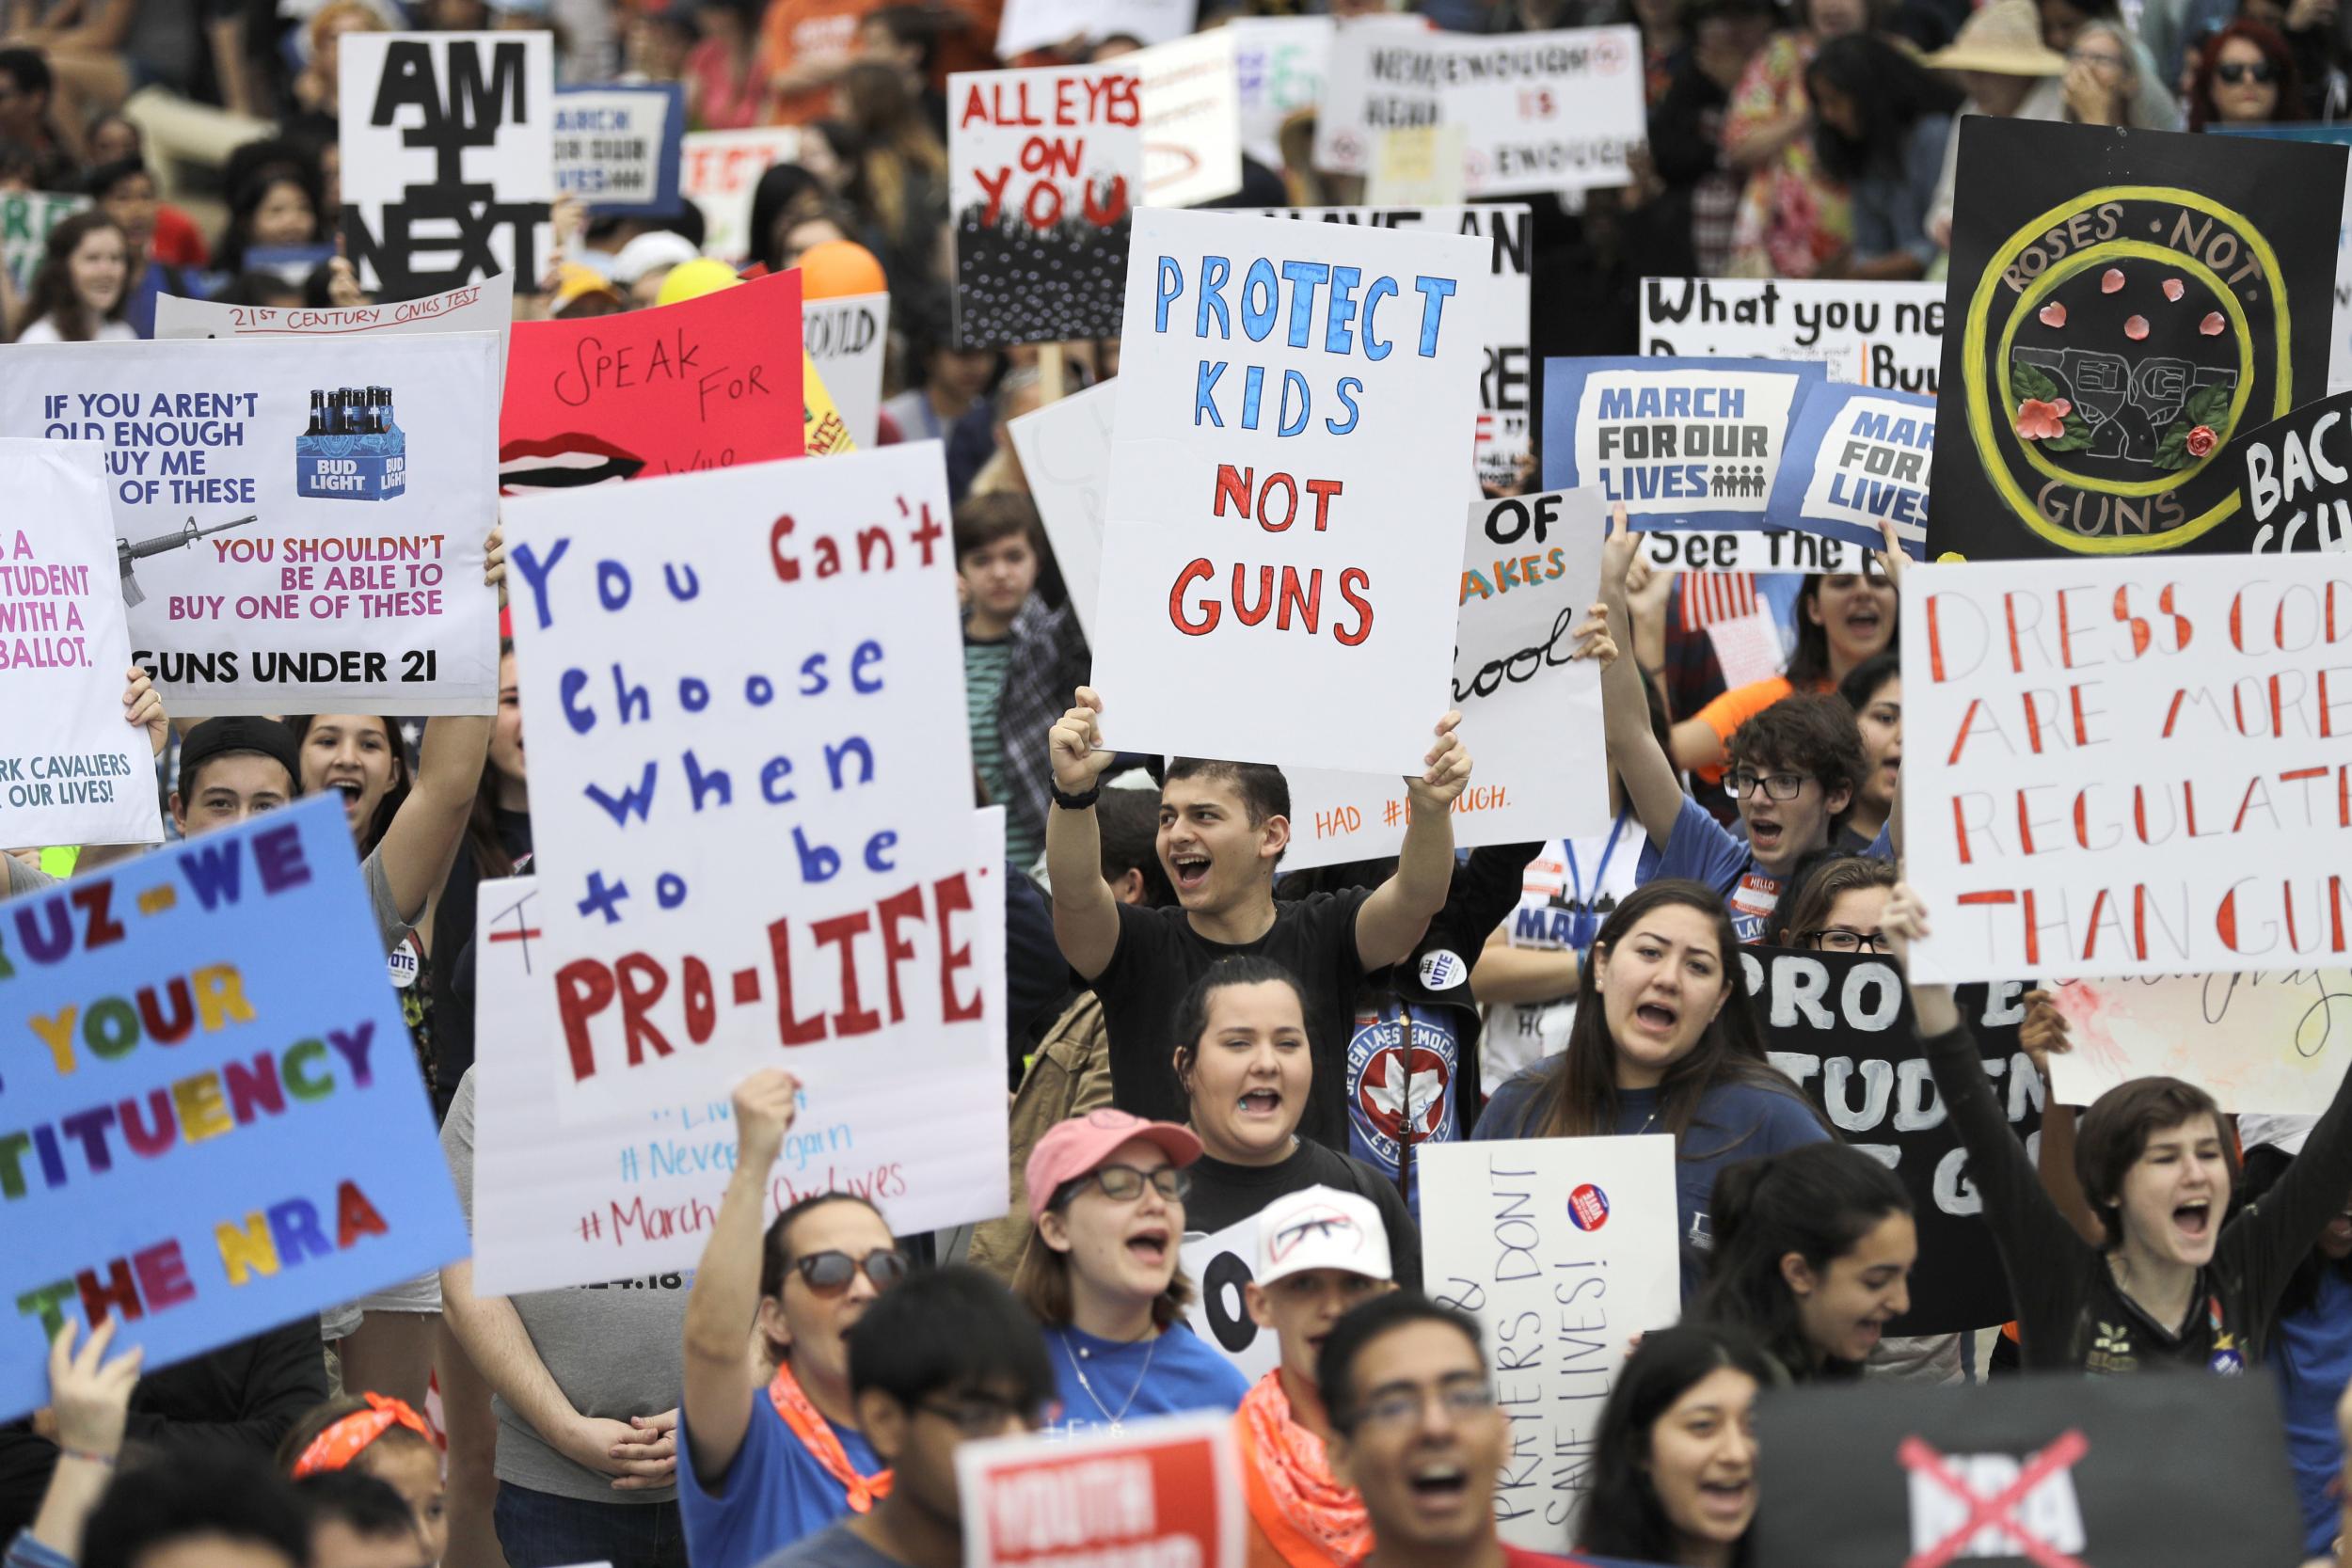 Student activists have led a loud charge to push politicians on gun control